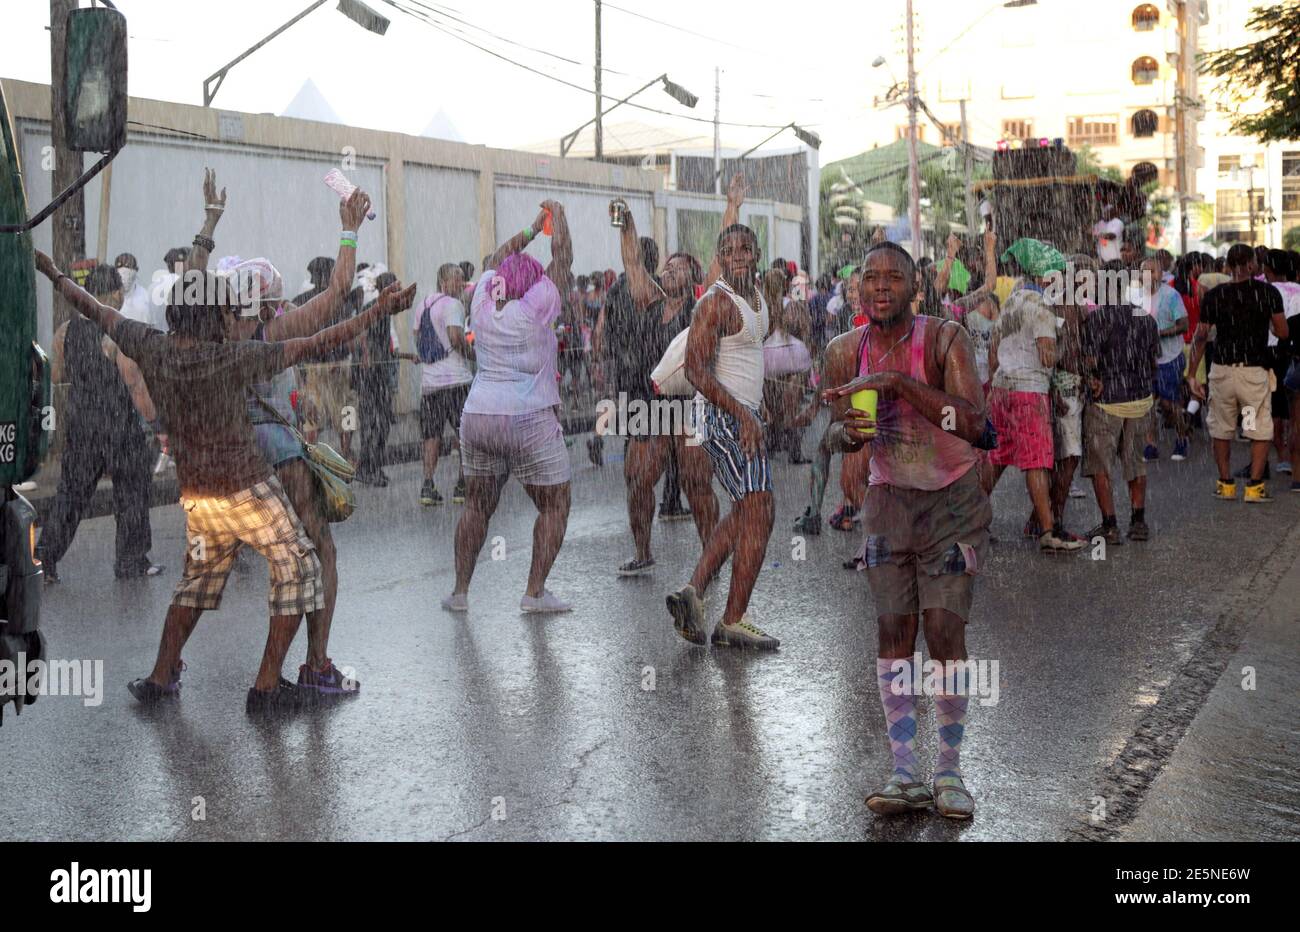 A reveller protects his drink as it rains during Jouvert, part of Carnival  in Saint James, Port of Spain February 16, 2015. Jouvert originates from  the French phrase "jour ouvert", meaning daybreak